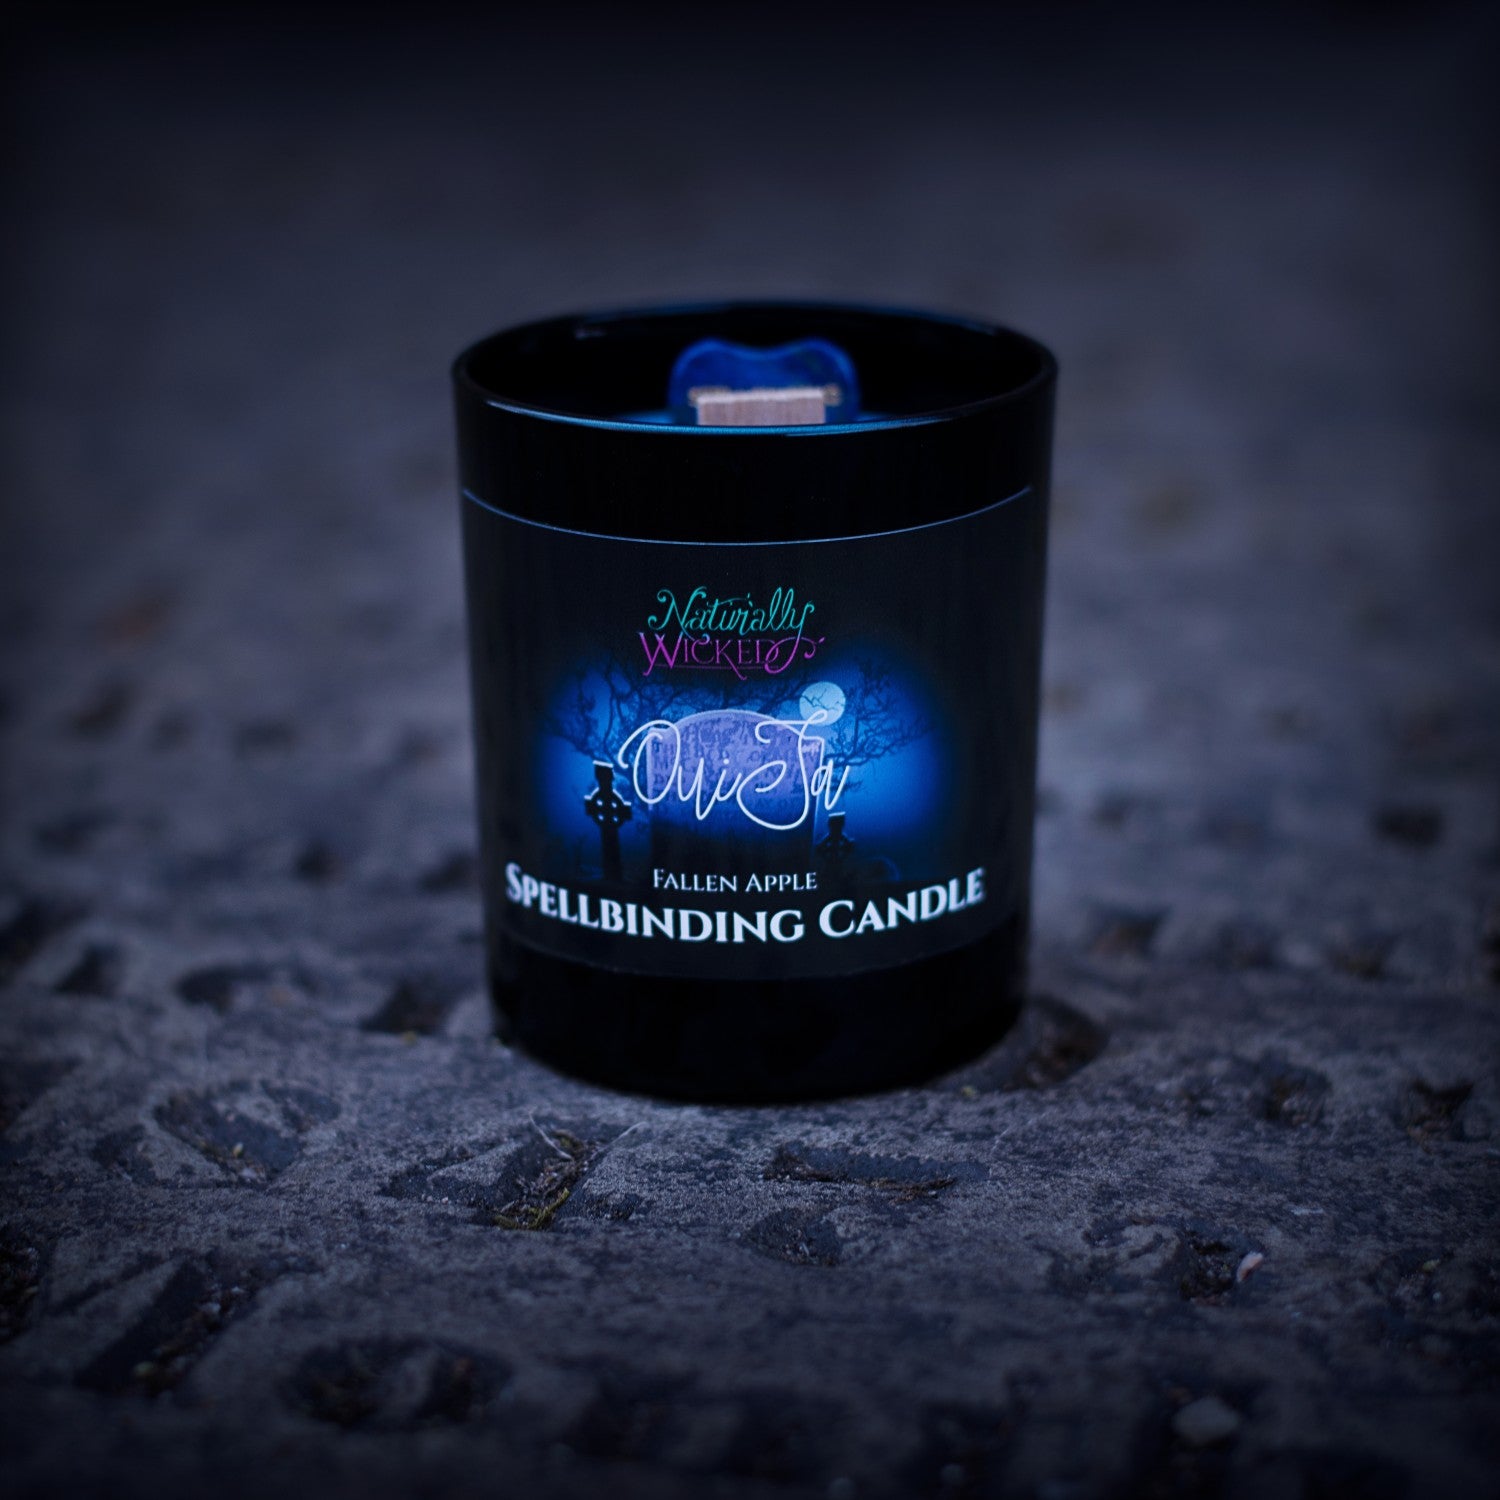 A Haunting View Of The Perfect Spell Candle Situated Within A Spooky Graveyard At Night. Naturally Wicked Spellbinding Ouija Candle Proudly Presents It's Dark Black Gloss Label With A Dark And Spooky Graveyard Design On The Front. The Candle Features Plant-based Smooth Blue Wax, A Wood Wick And A Beautiful Carved Sodalite Crystal Planchette.